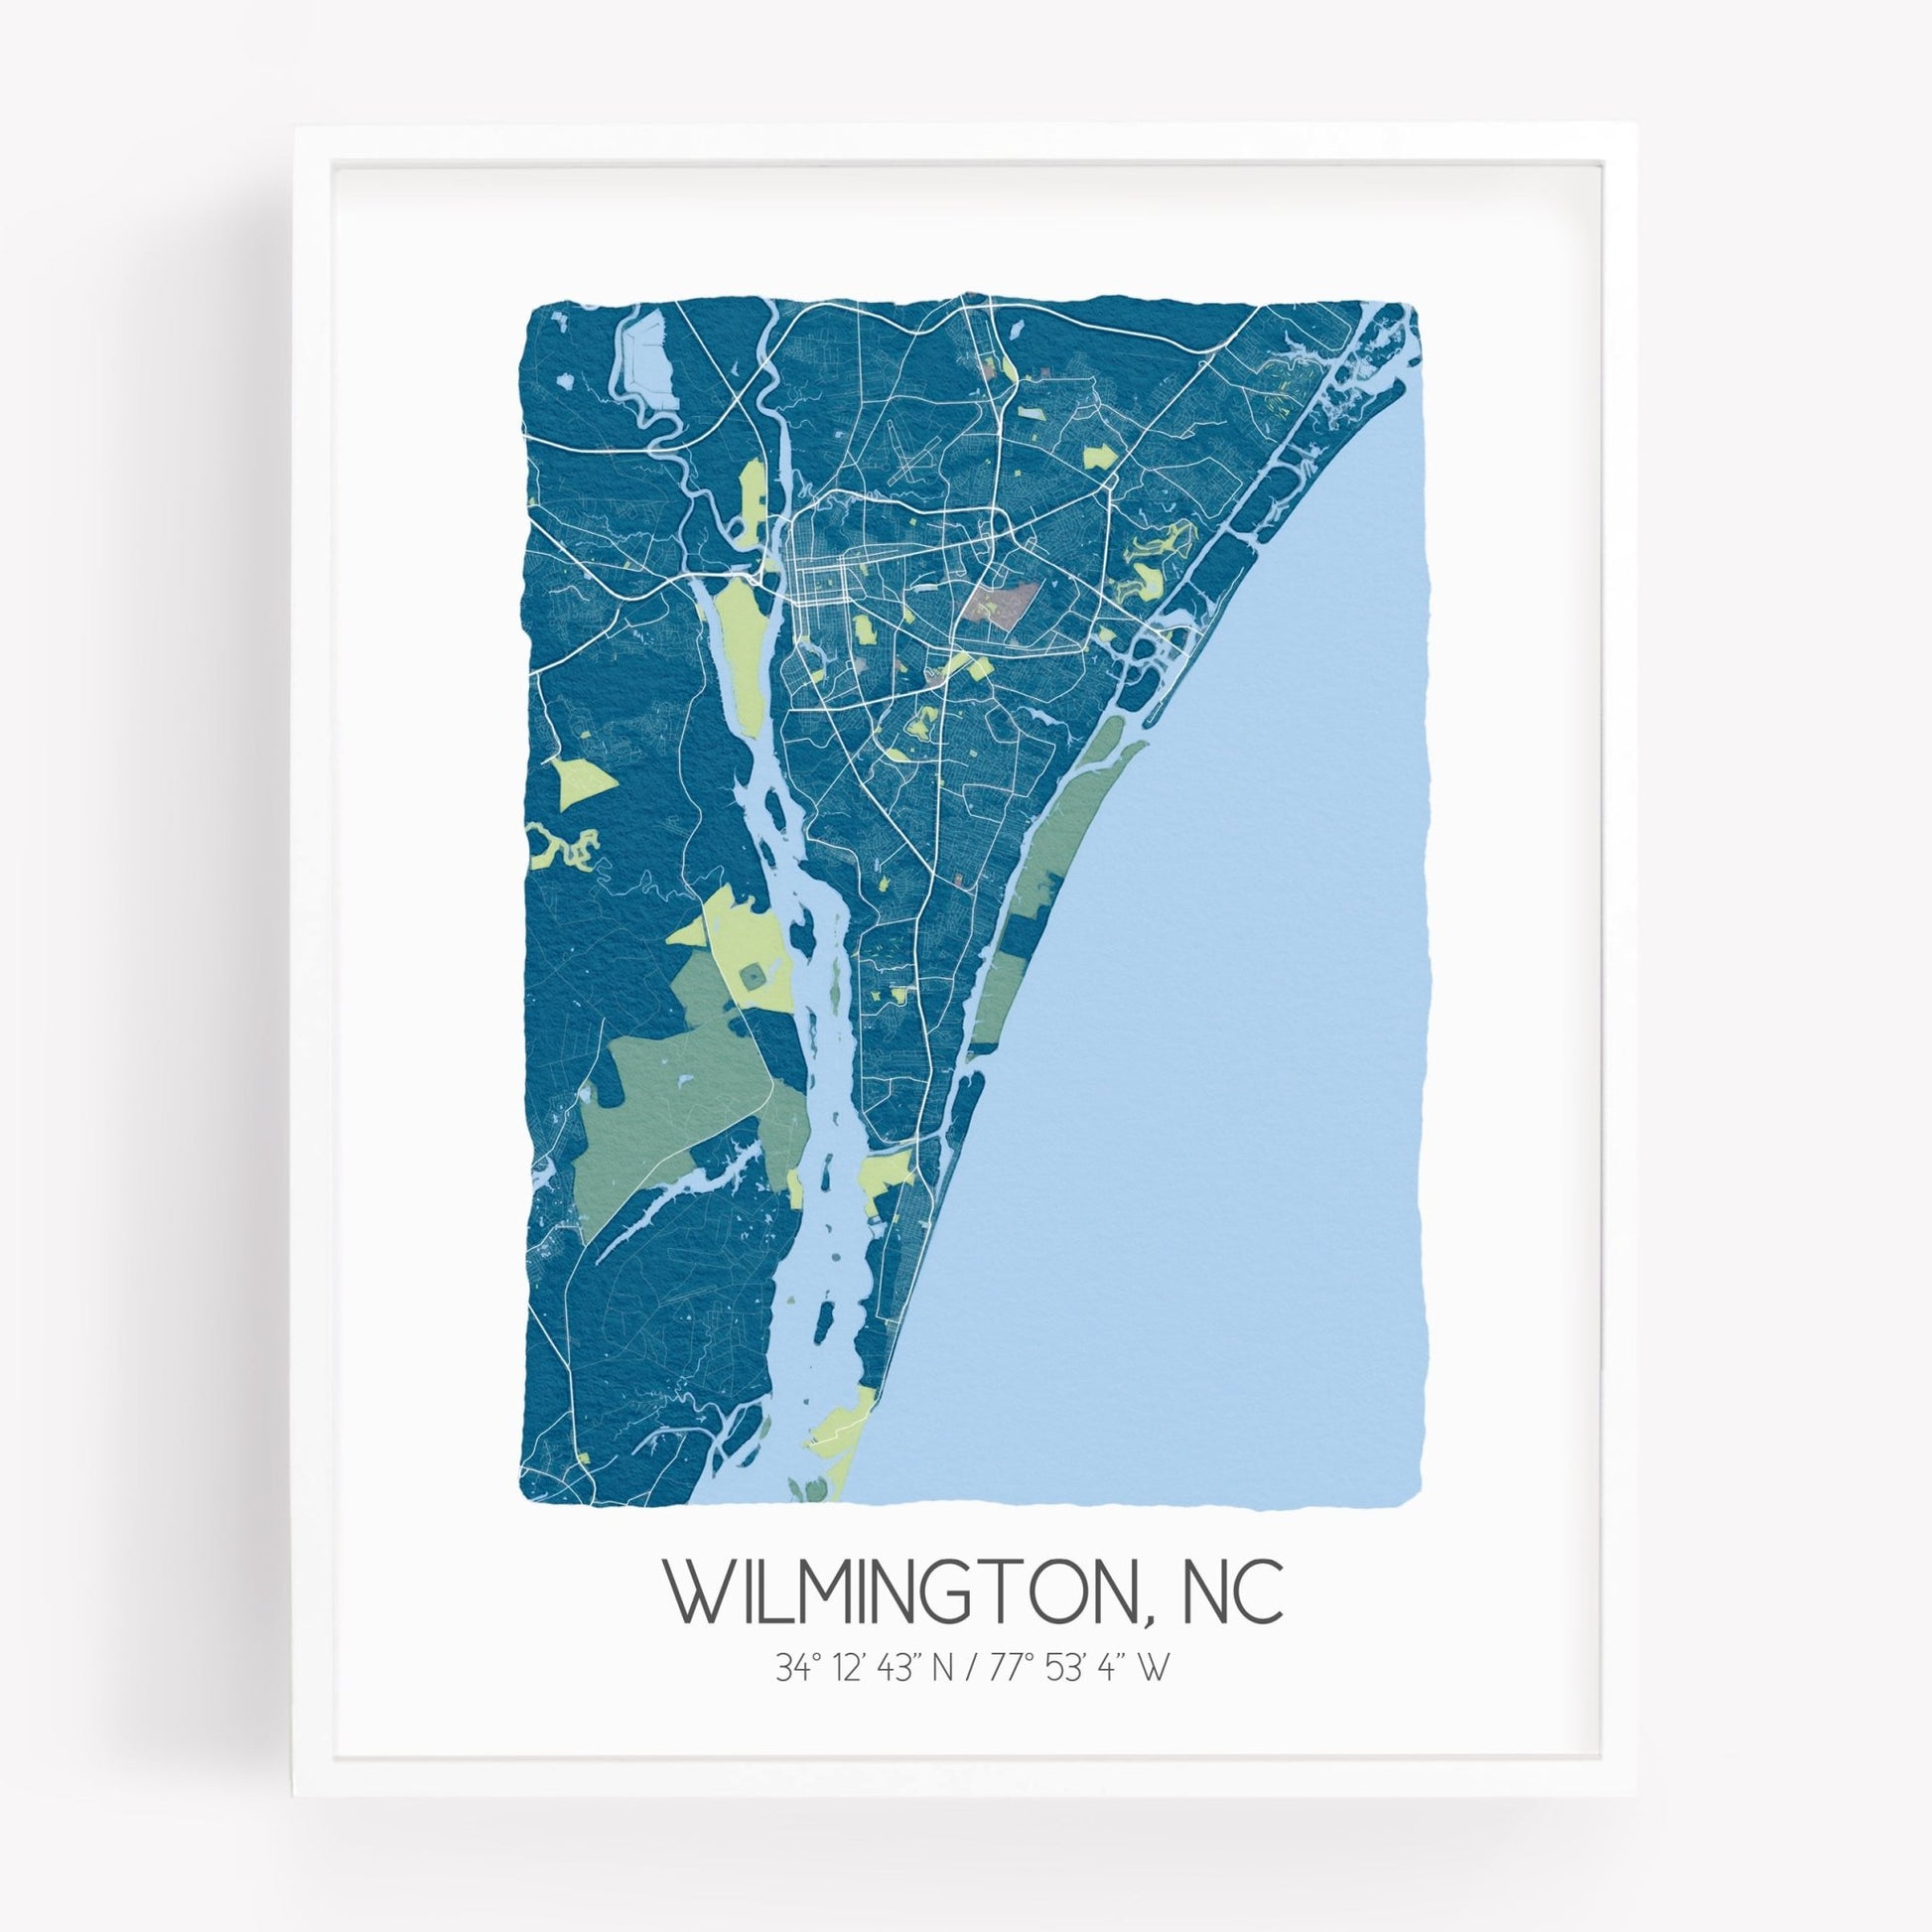 A city map print of Wilmington North Carolina, in the color blue